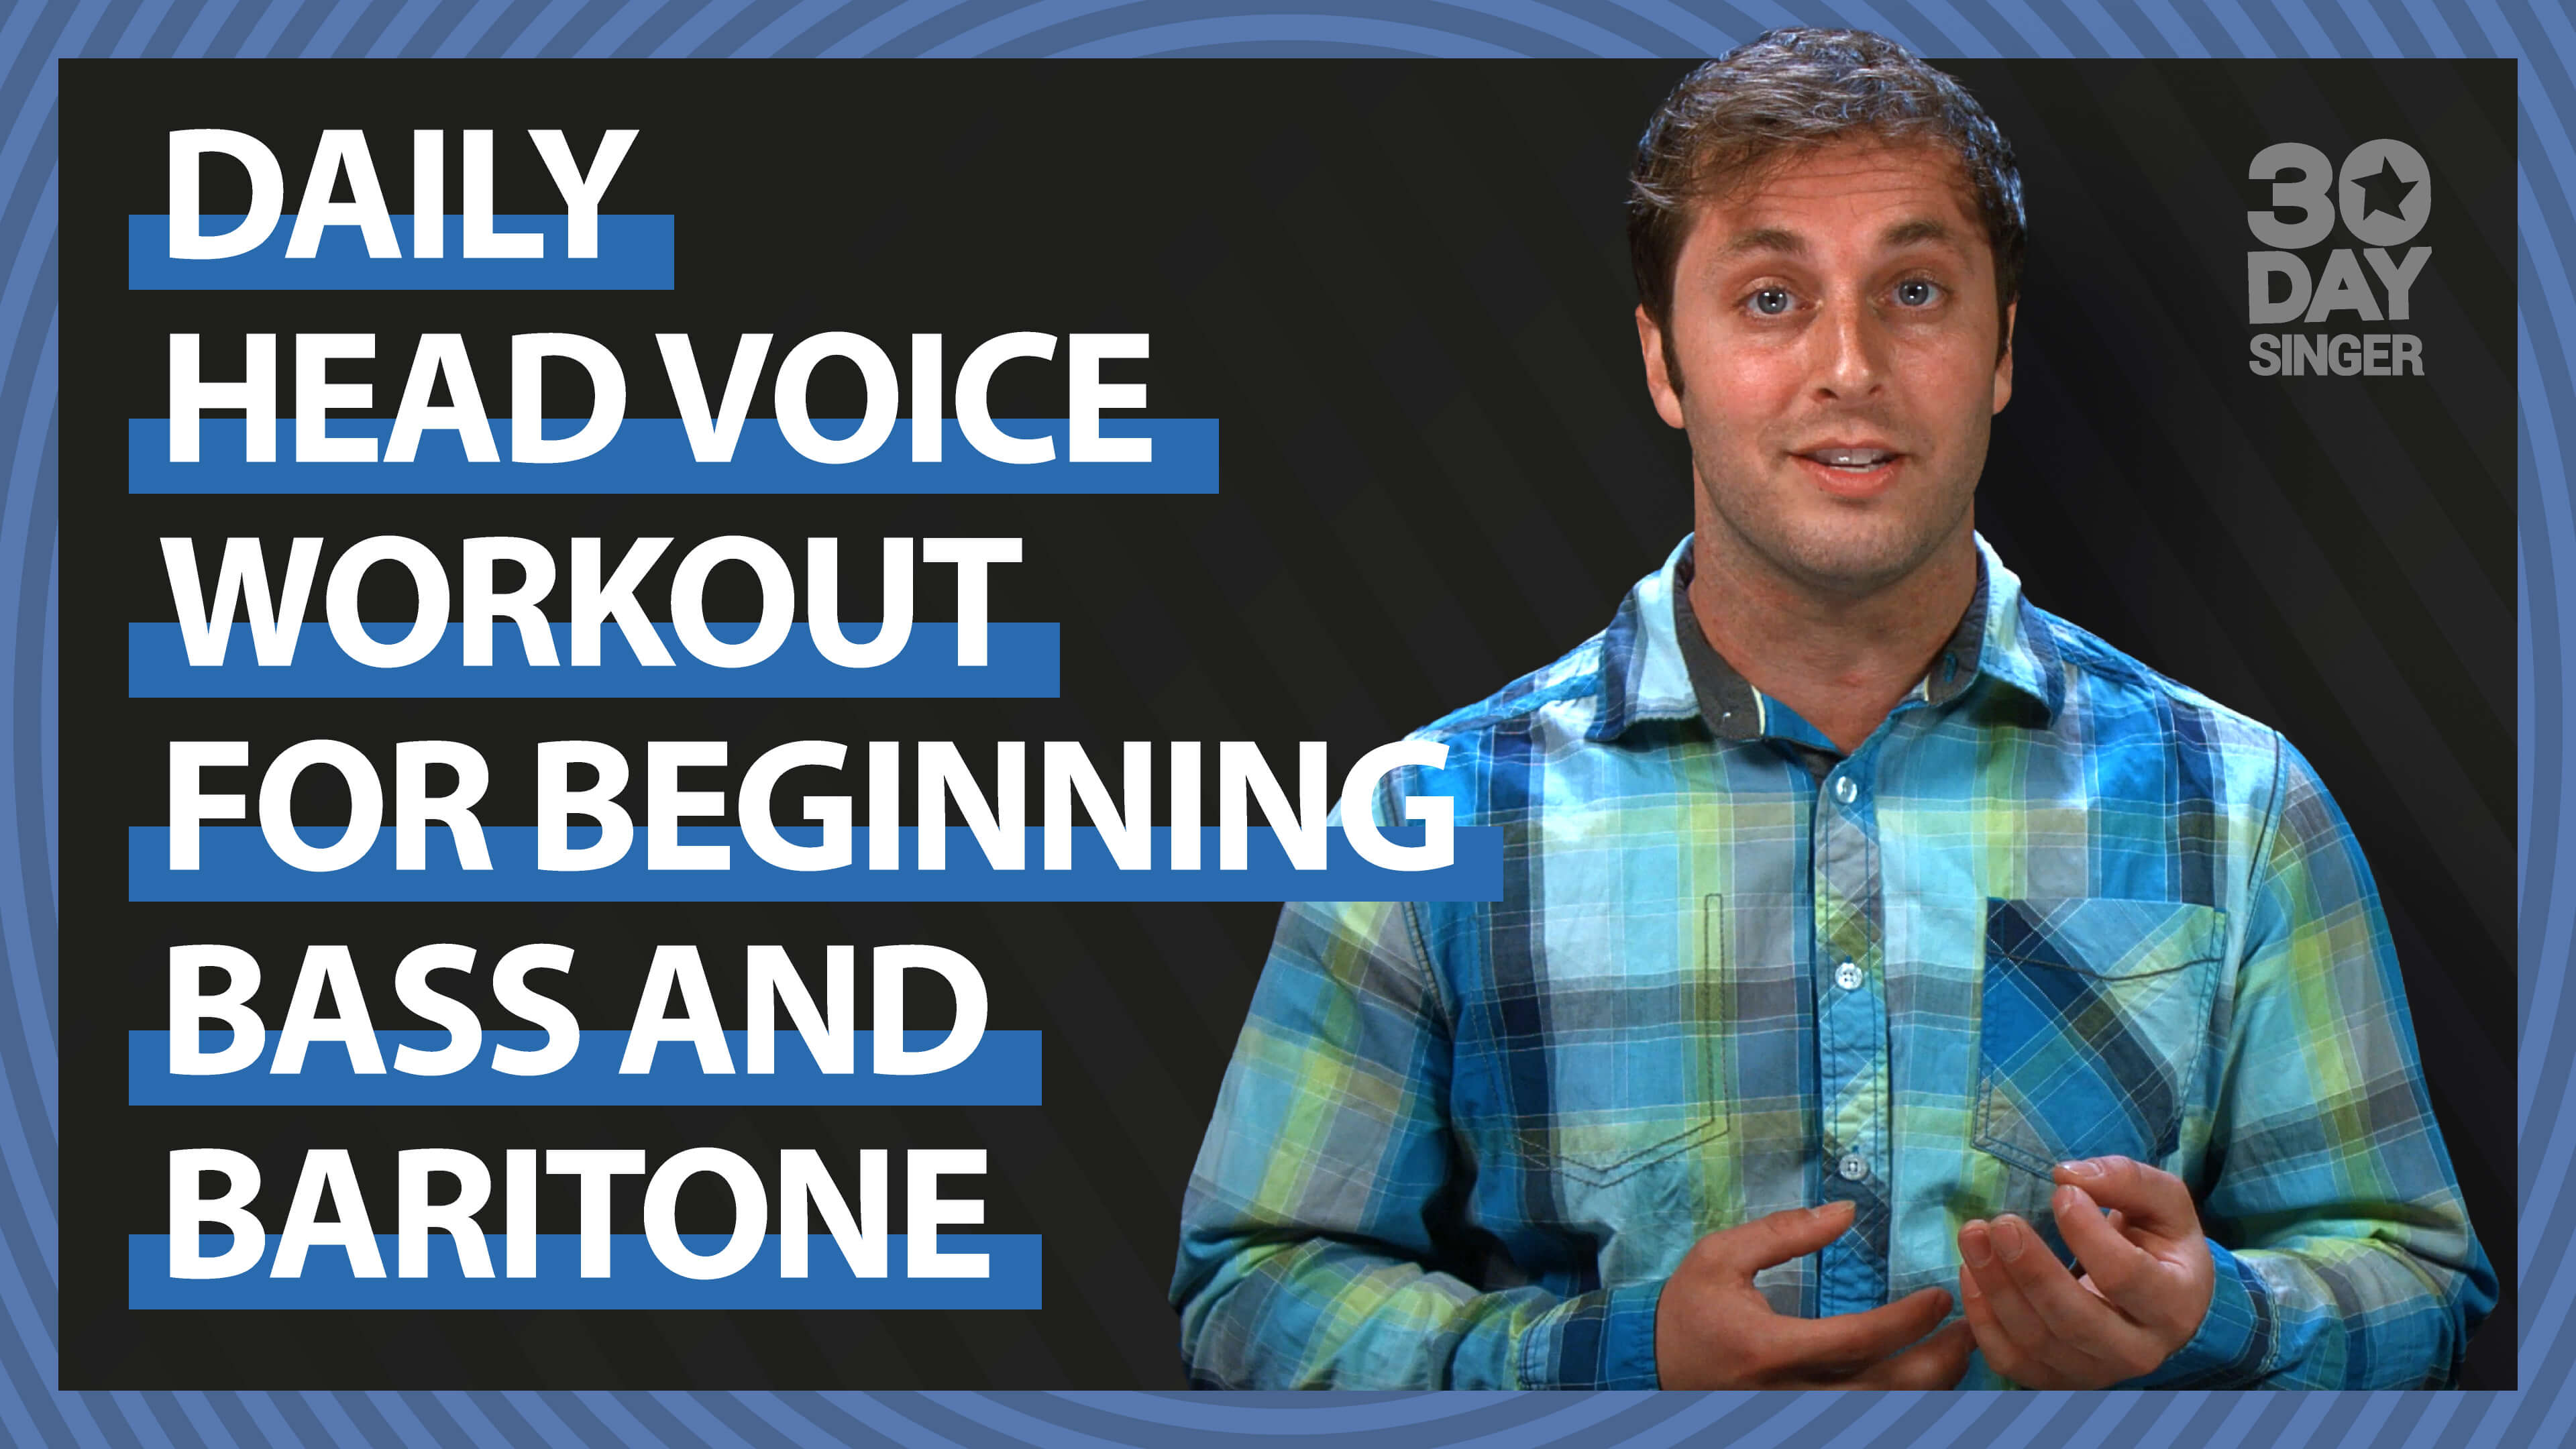 Daily Head Voice For Beginning Bass And Baritone